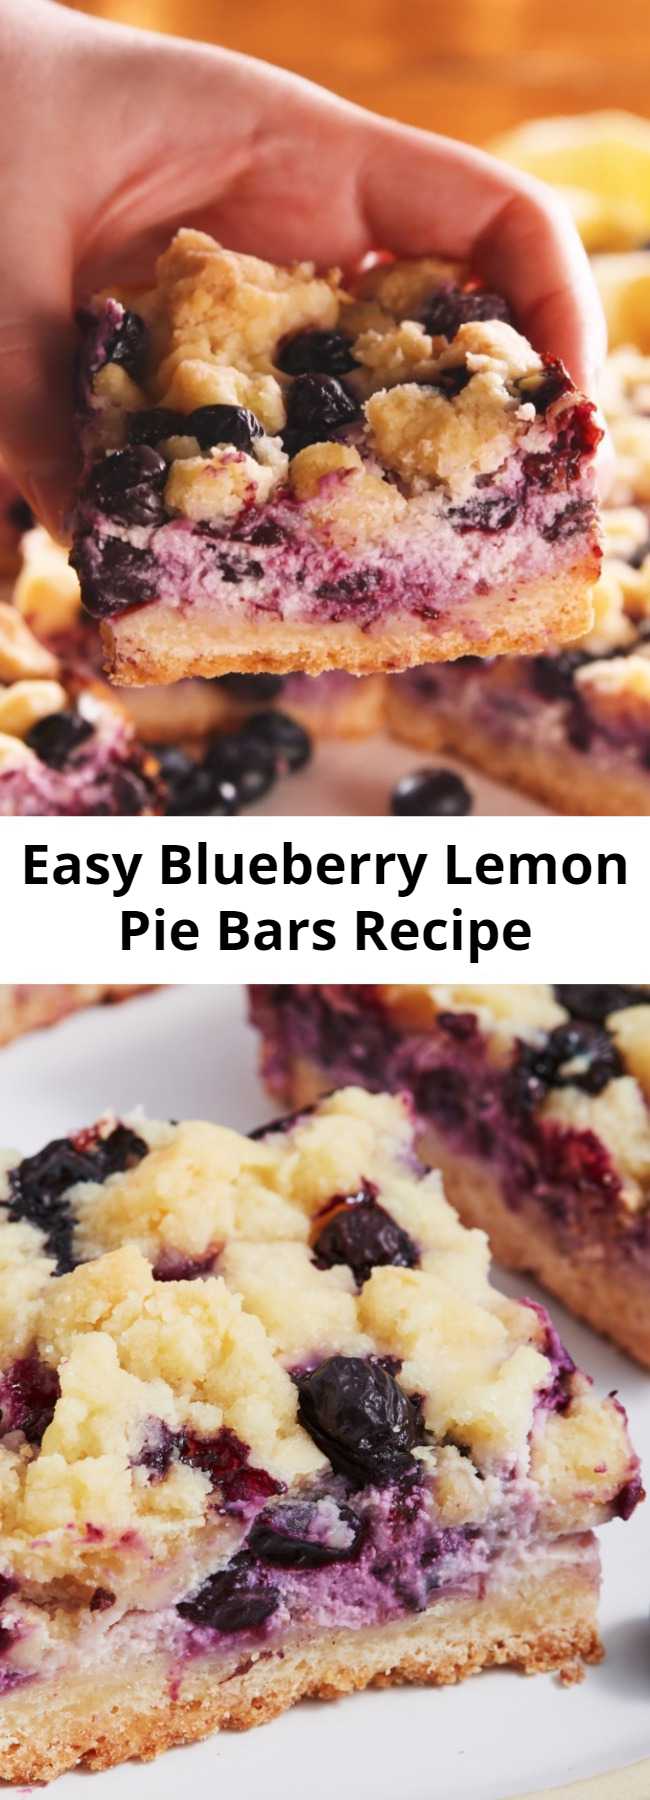 Easy Blueberry Lemon Pie Bars Recipe - Lemons and blueberries go together like spring and sunshine. They are the perfect combo and these cookie pie bars are our favourite yet! Zesty, creamy and with a steusel crumble topping, these flavoursome bars are like sunshine in cake form.